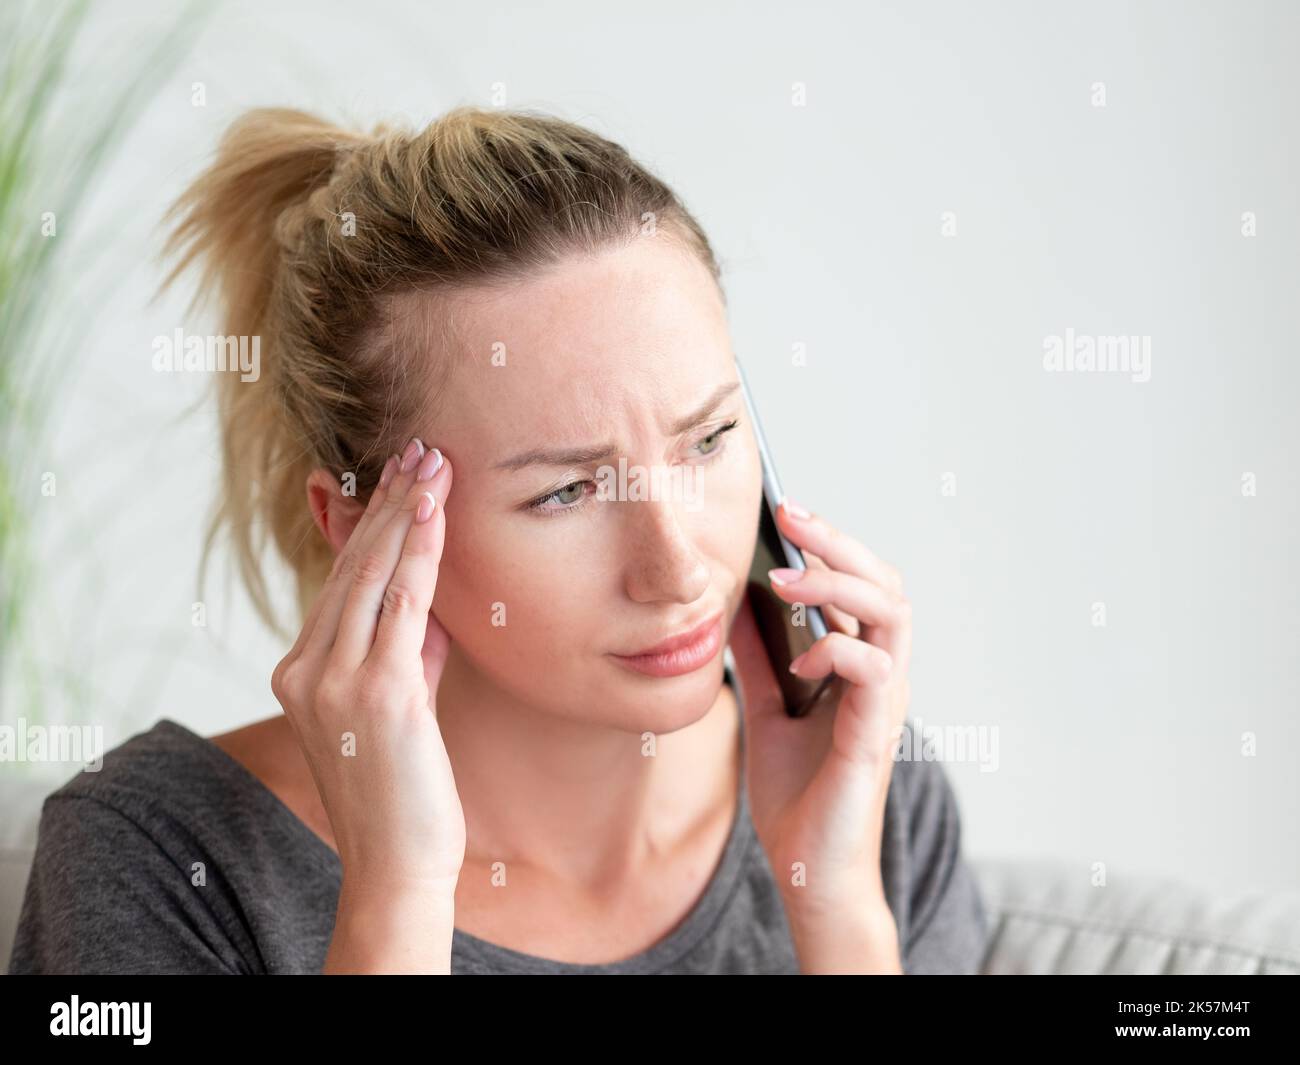 bad news exhausted woman psychology support Stock Photo